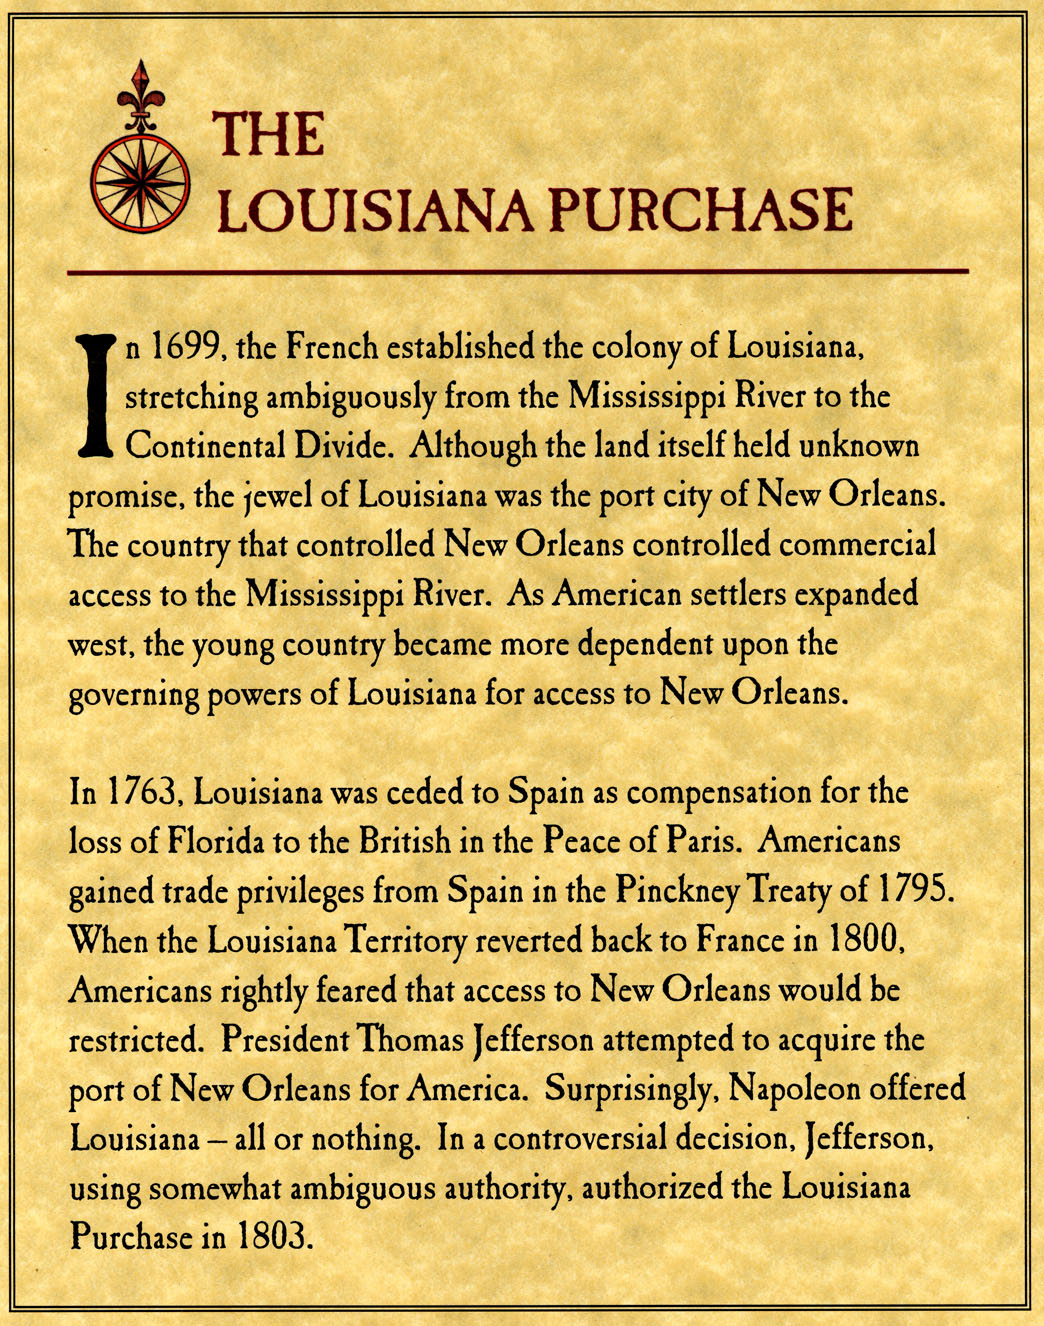 In 1699, the French establilshed the colony of Louisiana, stretching ambiguously from the Mississippi River to the Continental Divide.  Although the land itself held unknown promise, the jewel of Louisiana was the port city of New Orleans.  The country that controlled New Orleans controlled commercial access to the Mississippi River.